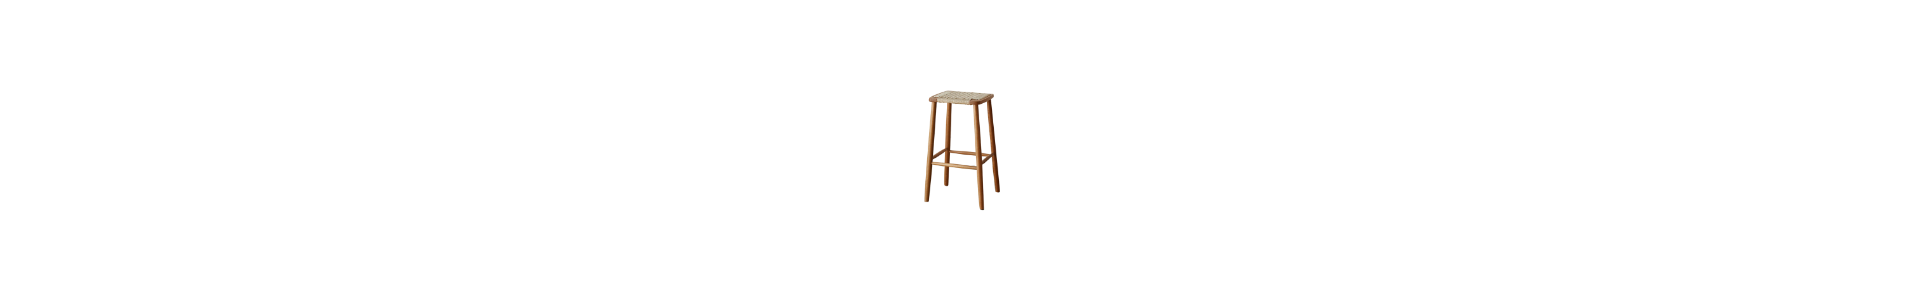 Wood and woven stools